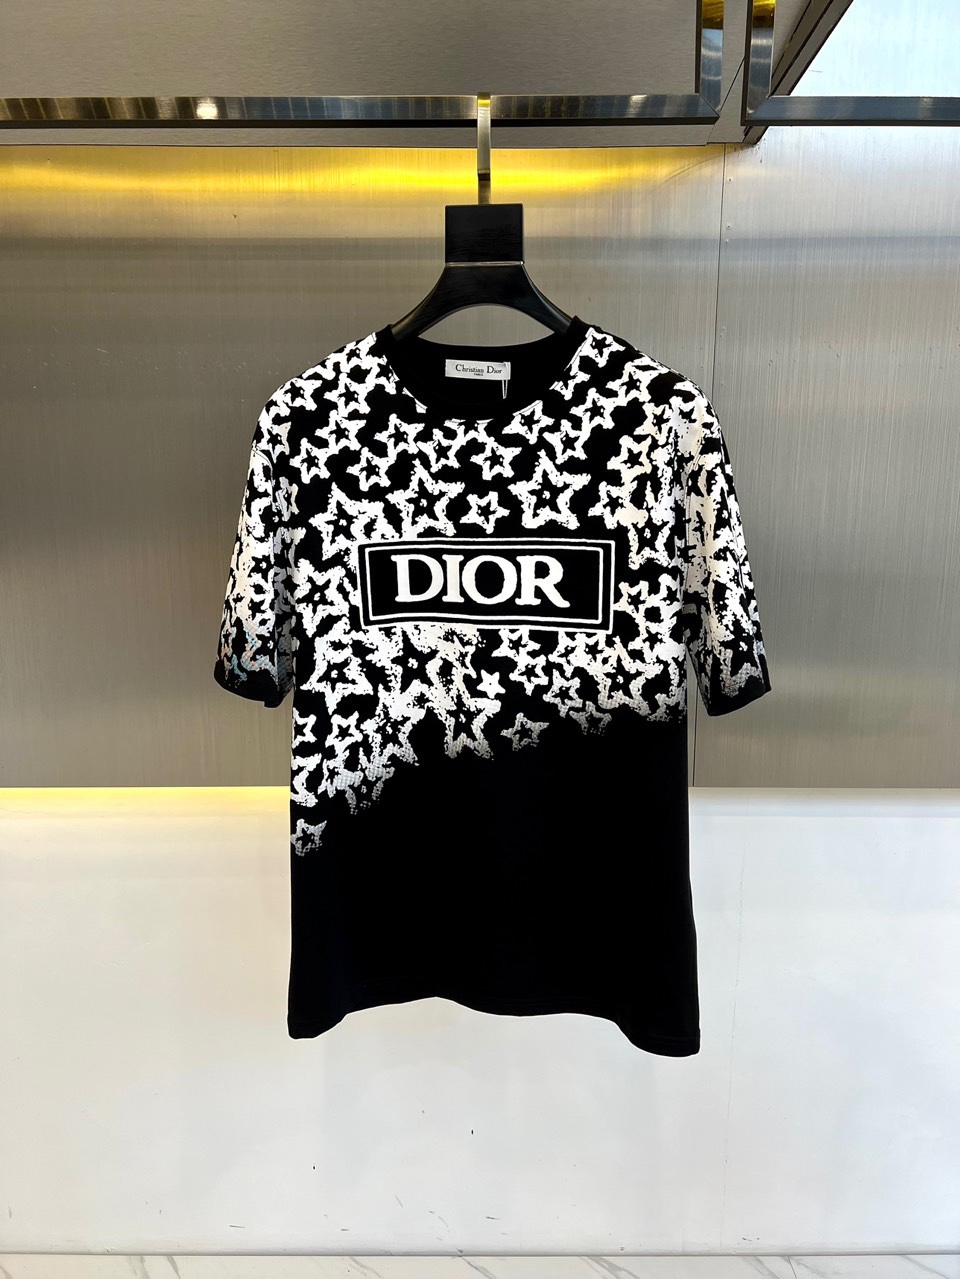 Dior Clothing T-Shirt Printing Combed Cotton Nylon Spring/Summer Collection Fashion Short Sleeve